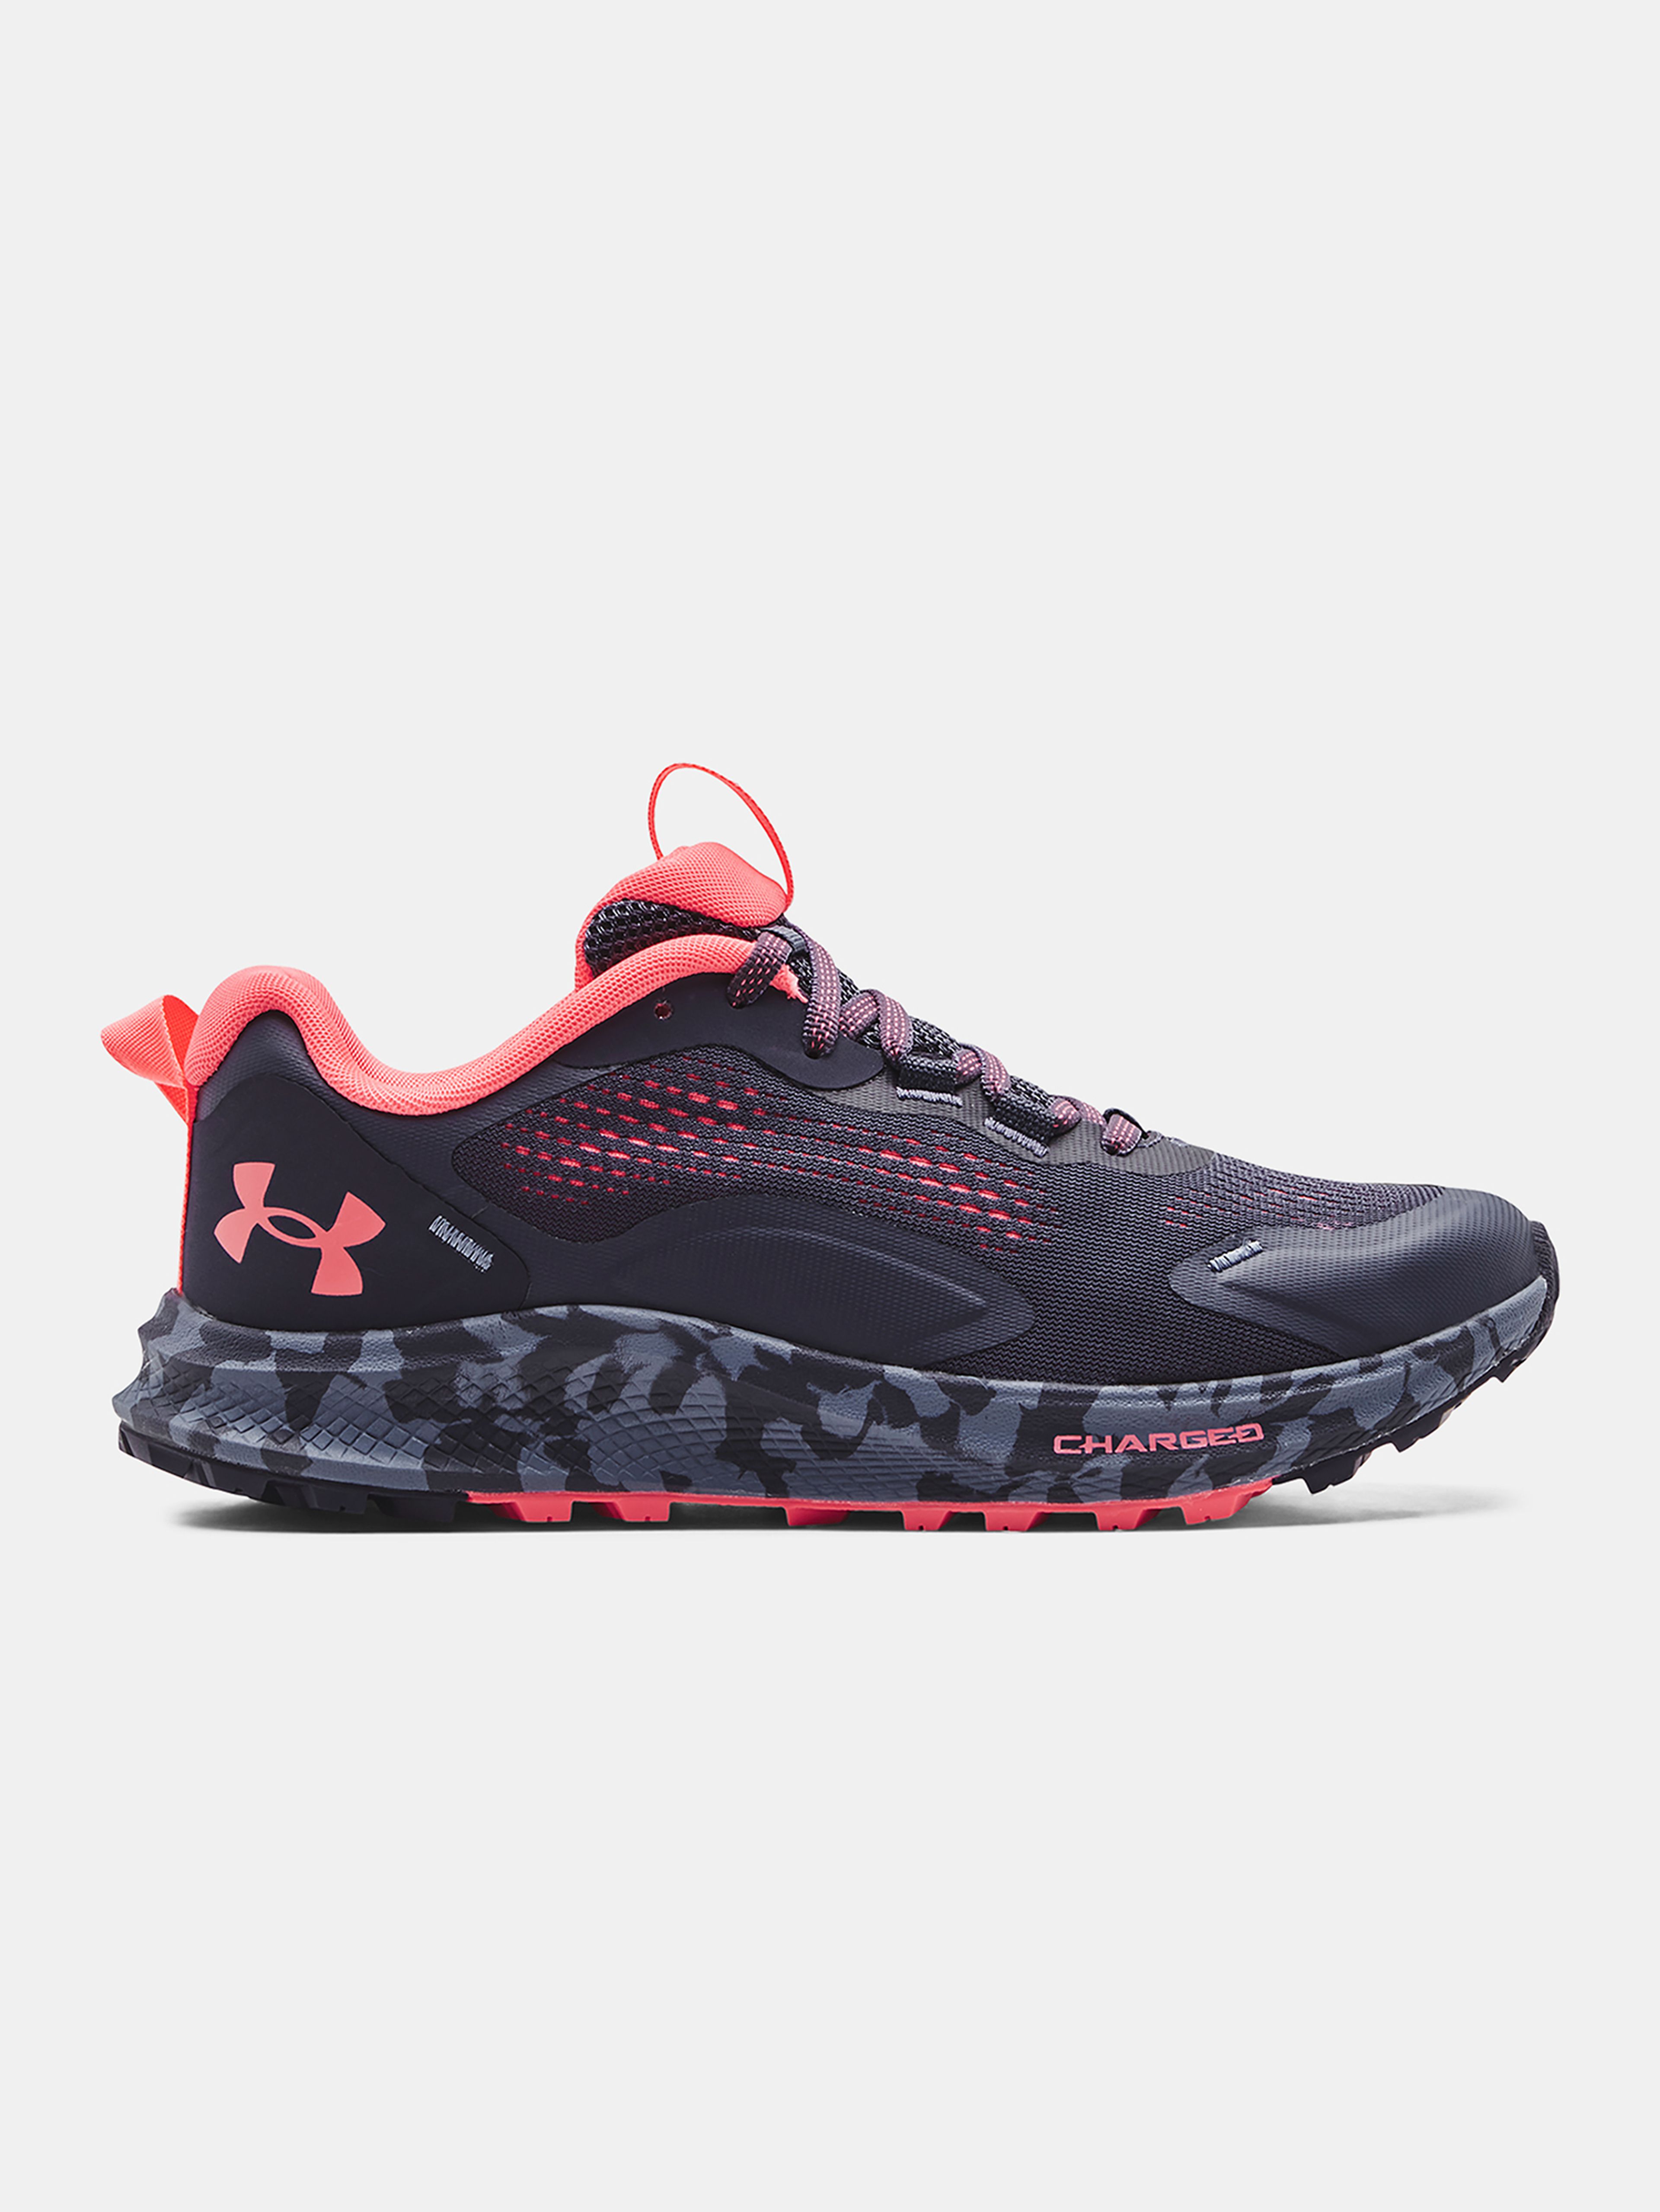 Boty Under Armour UA W Charged Bandit TR 2-GRY